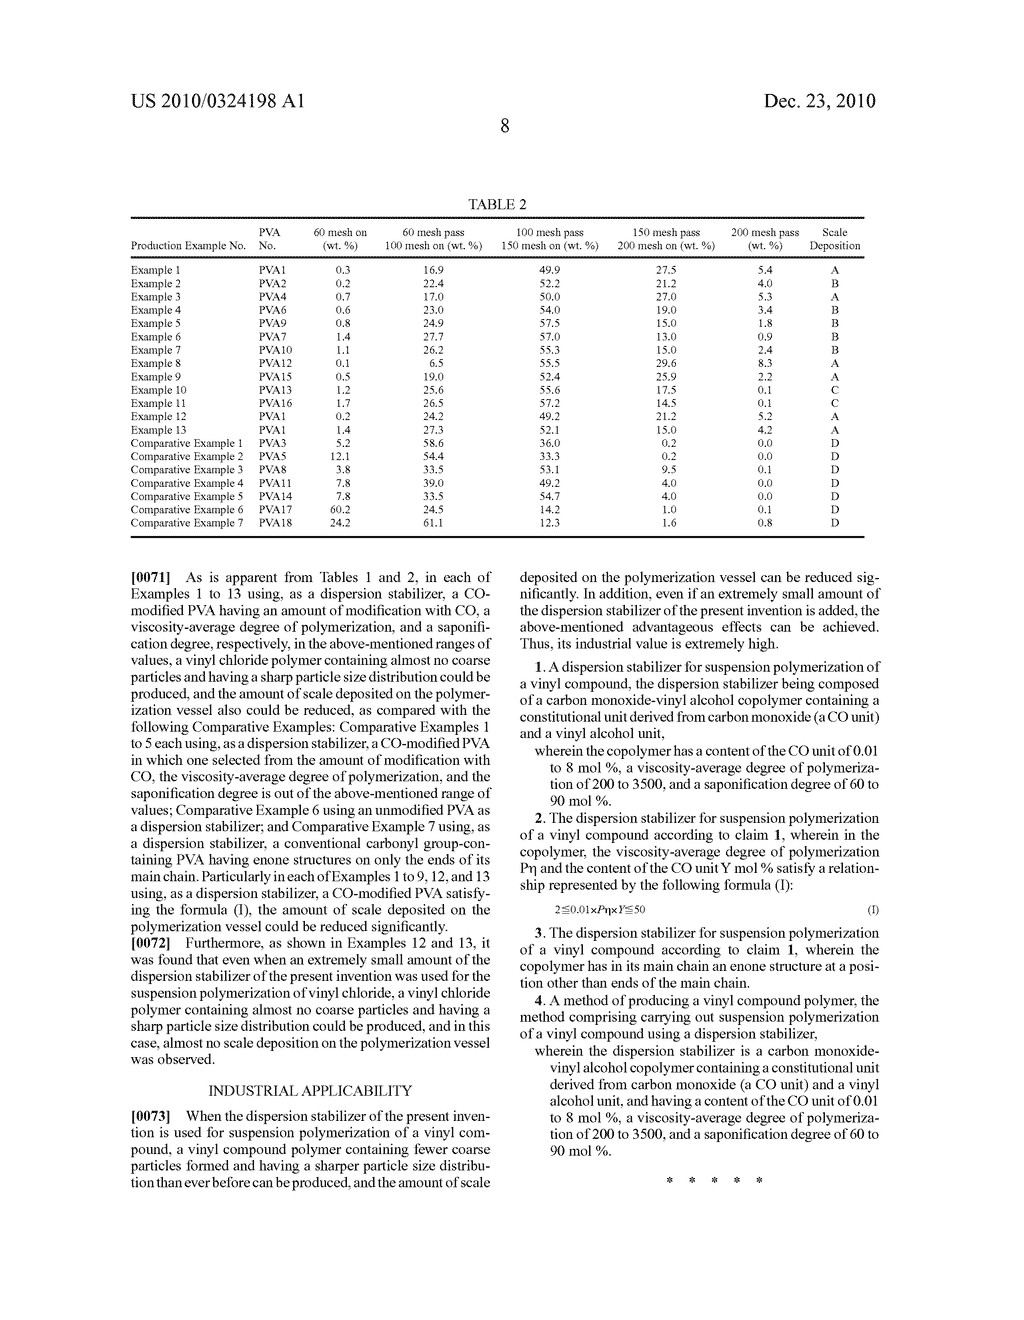 DISPERSION STABILIZER FOR SUSPENSION POLYMERIZATION OF VINYL COMPOUND AND METHOD OF PRODUCING VINYL COMPOUND POLYMER - diagram, schematic, and image 09